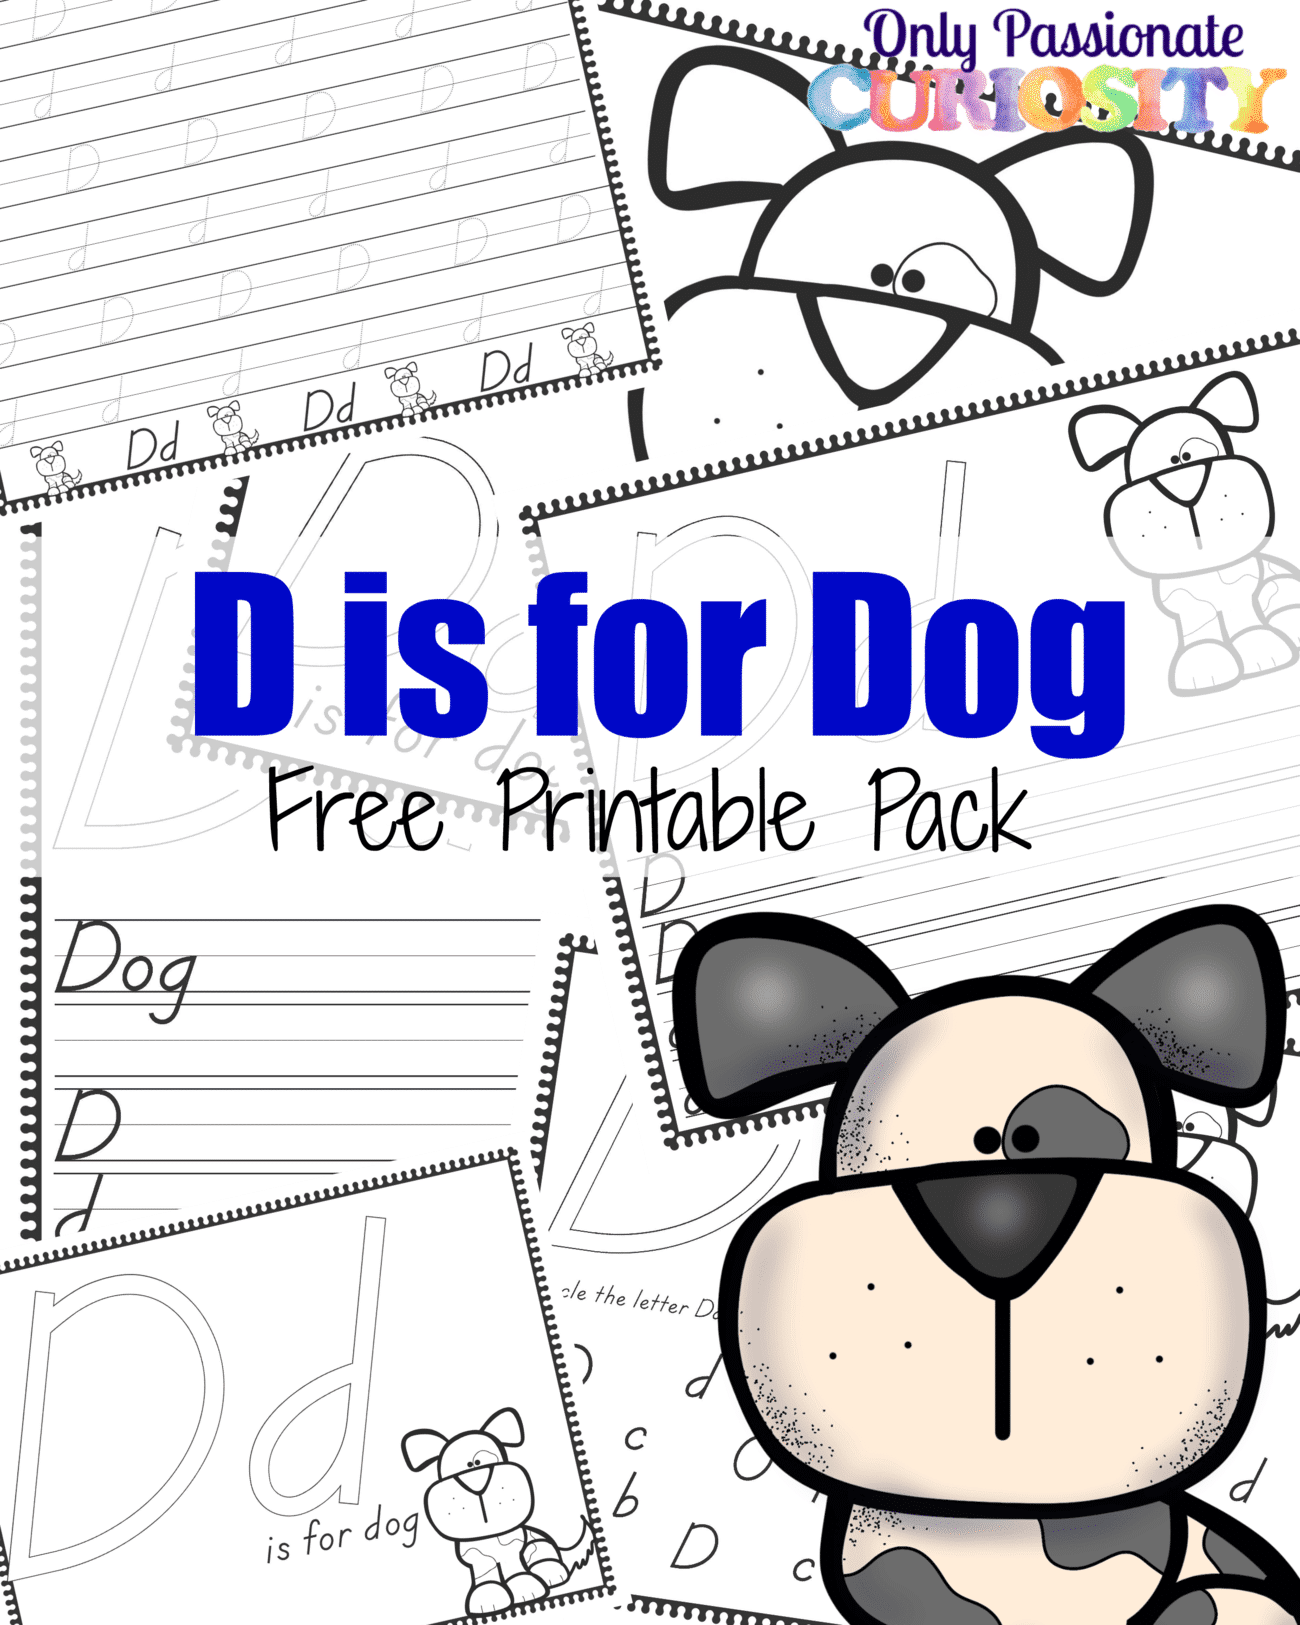 D is for Dog Handwriting Activity Pack